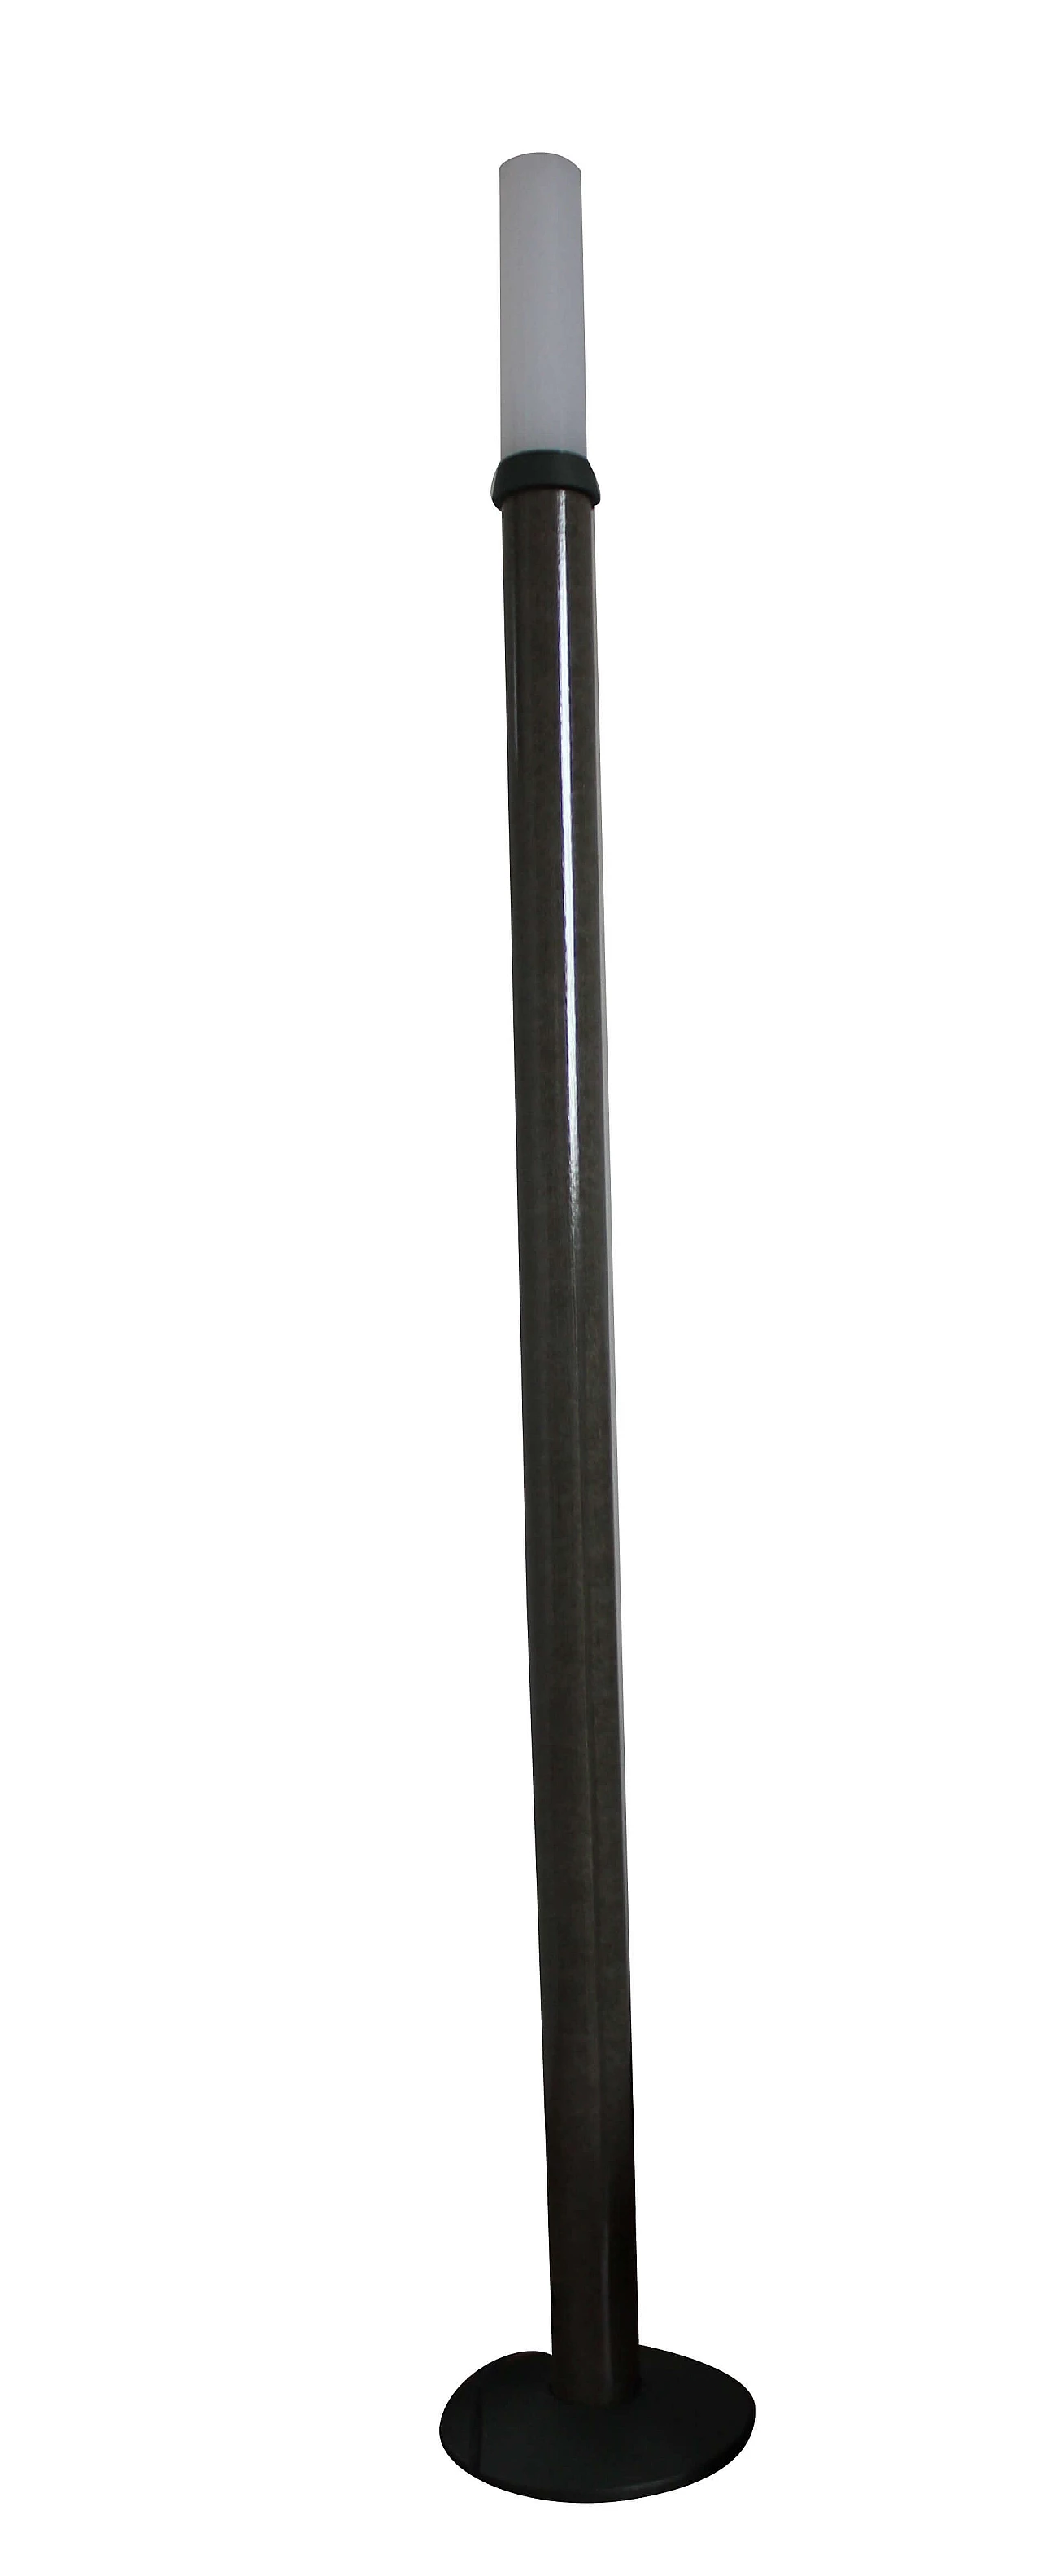 Outdoor floor lamp Olimpia 150 by Albini Helg and Piva for Sirrah 1103315